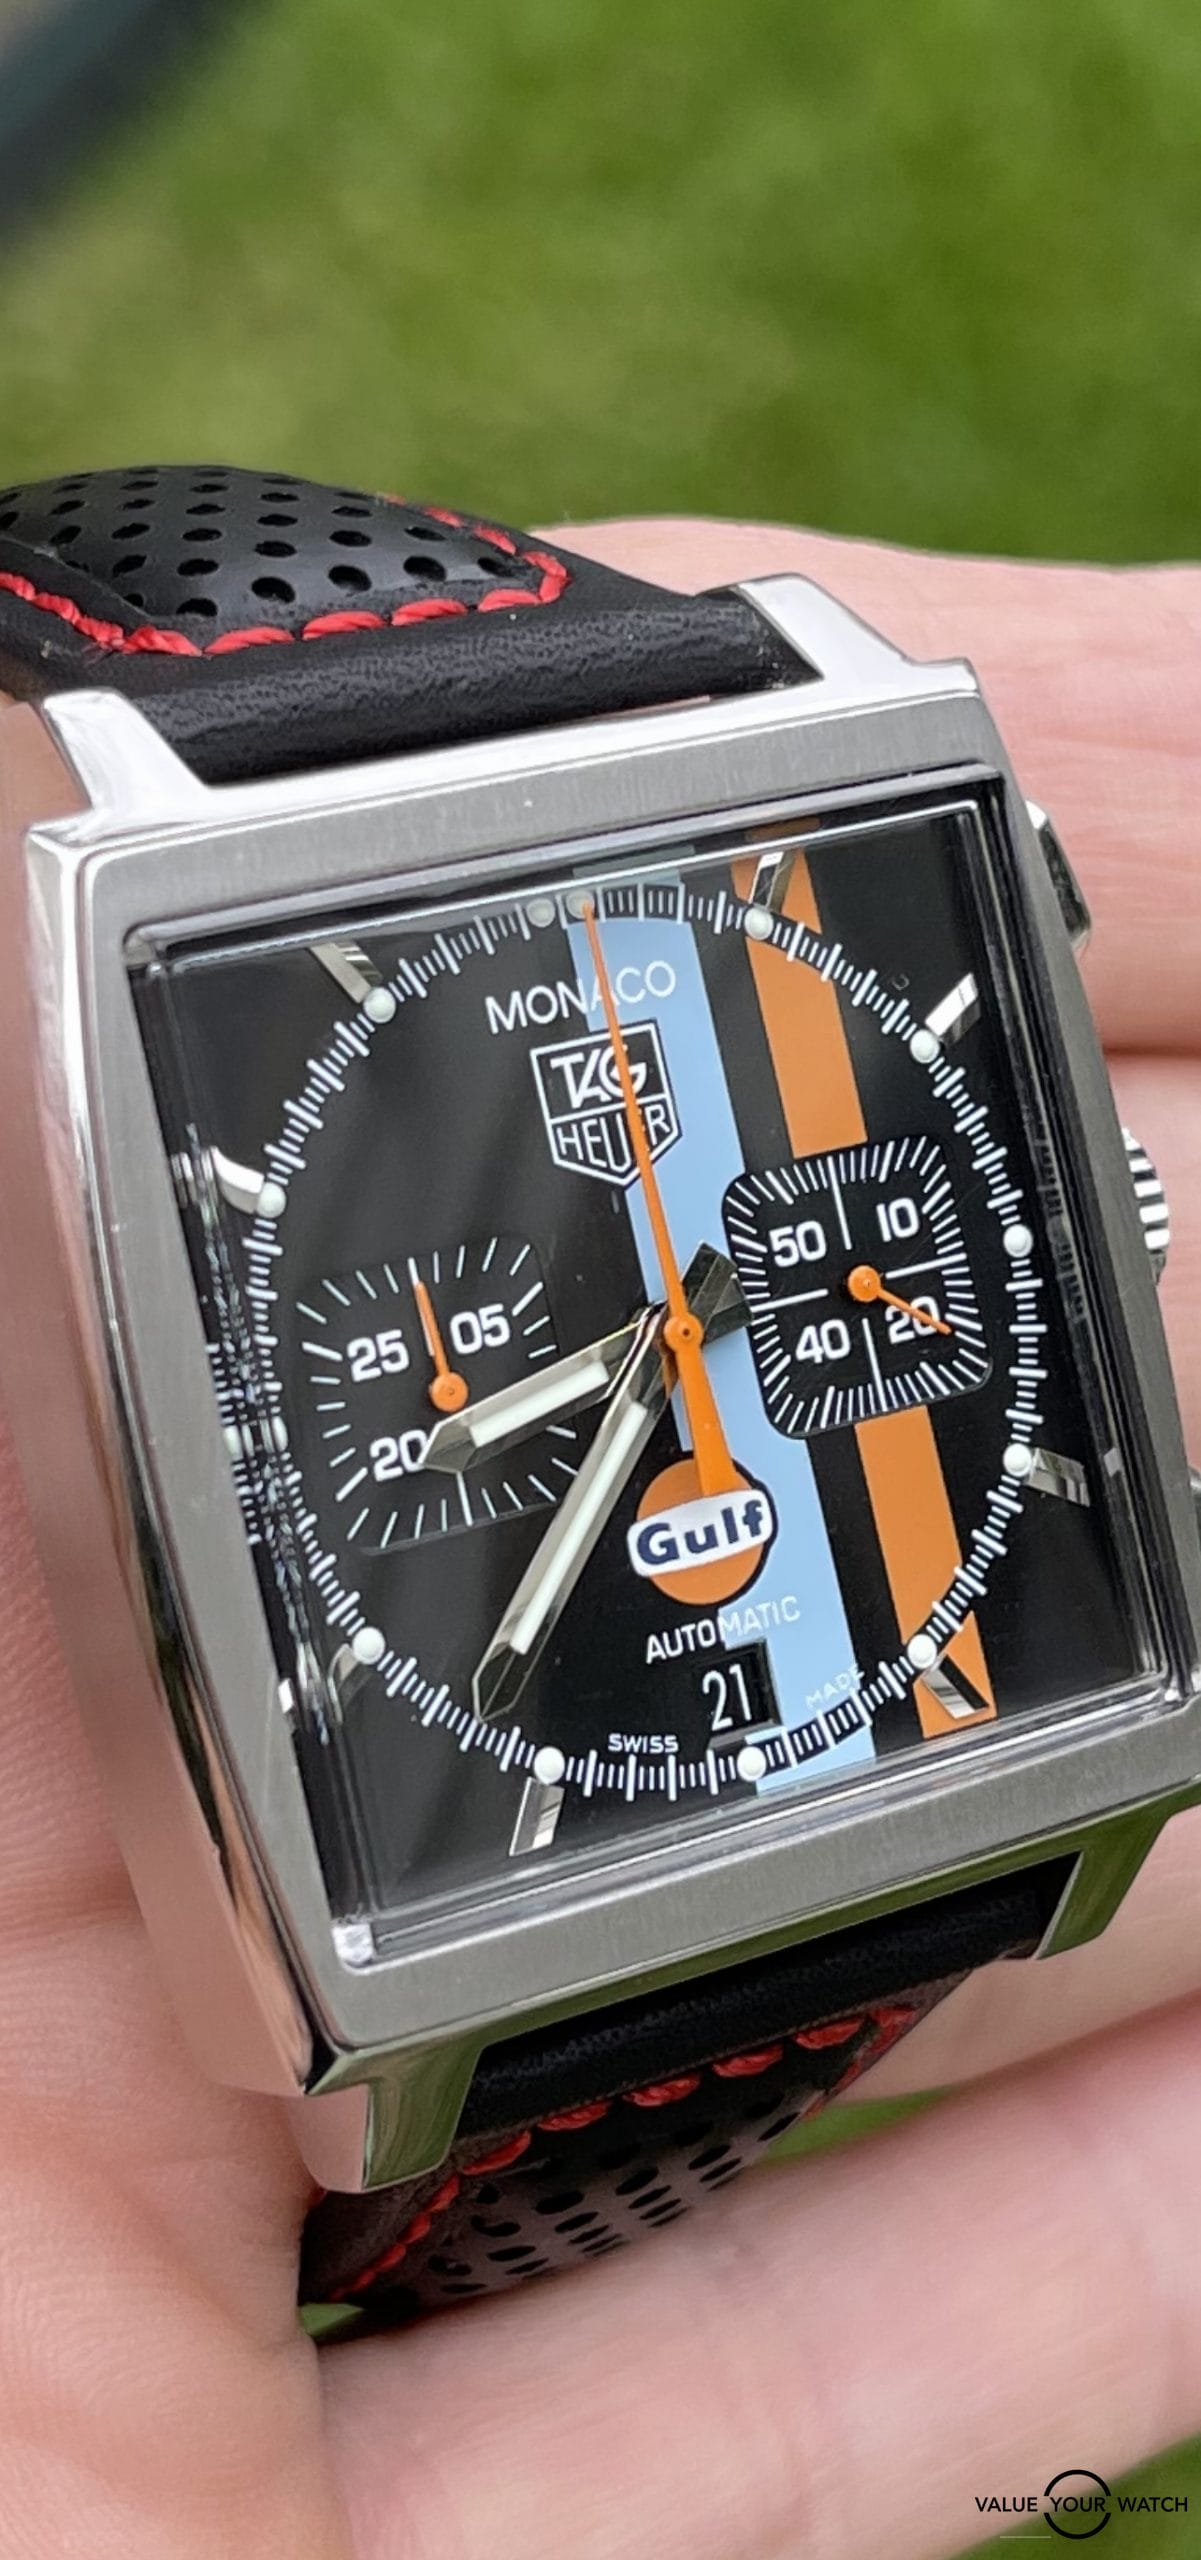 How to spot fake Tag Heuer before you buy the watch